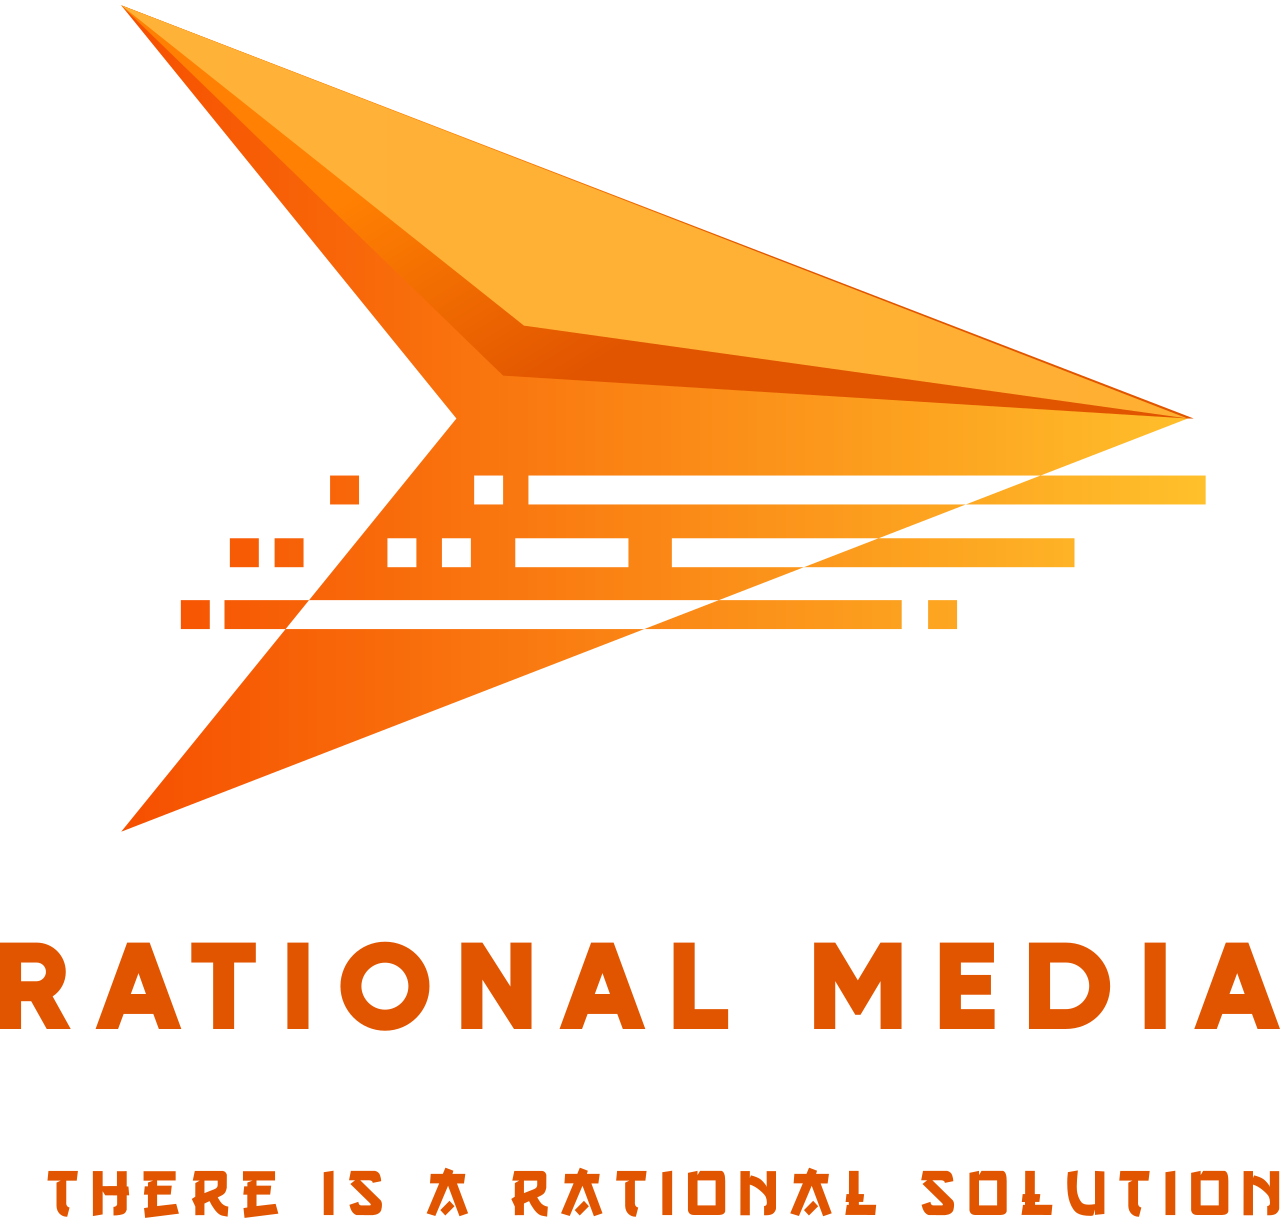 Rational Media 's web page